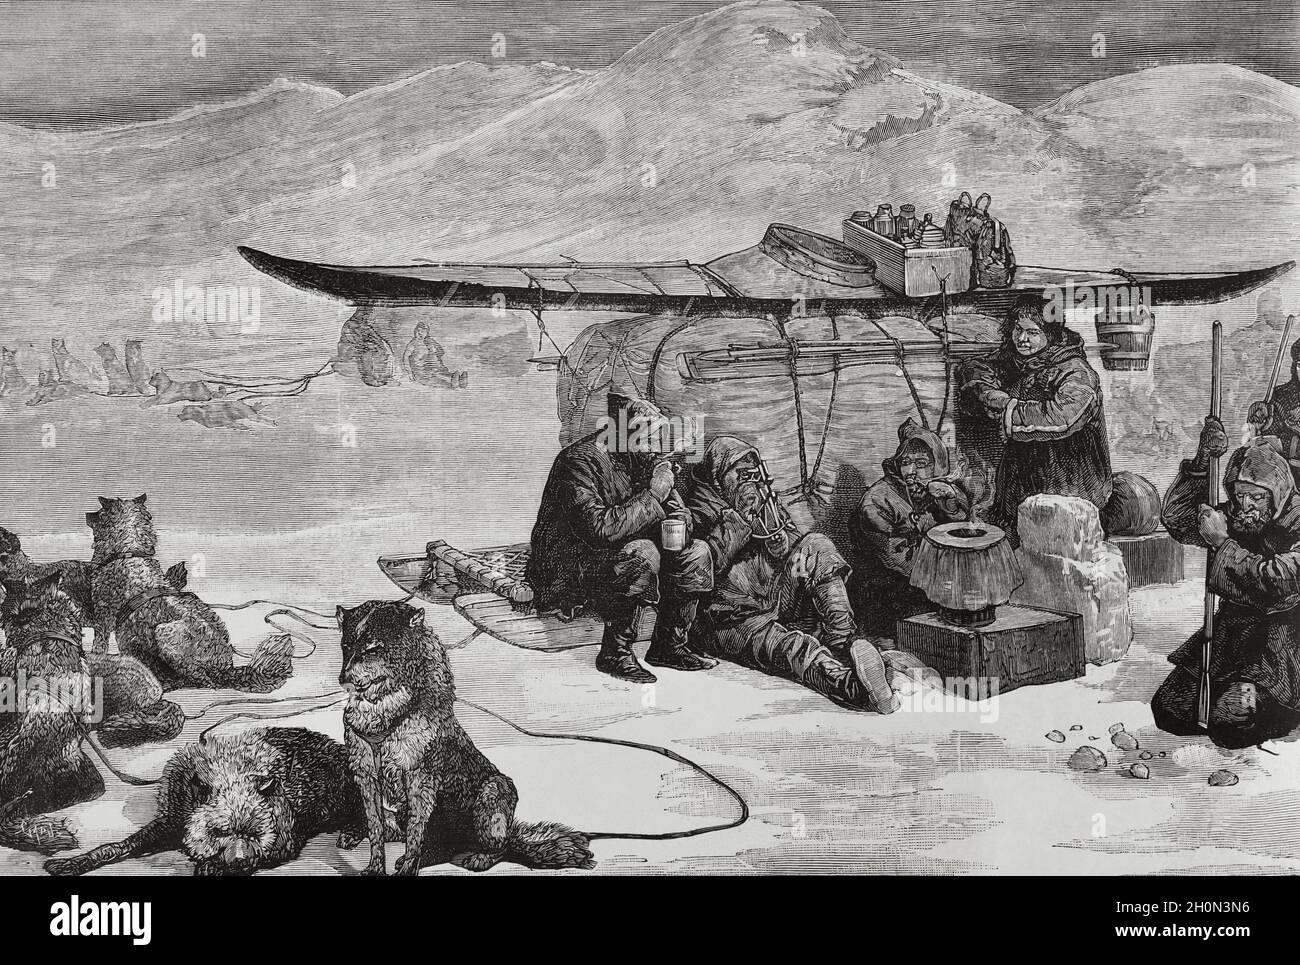 Captain Sir John Franklin's lost expedition to the Canadian Arctic, that departed from England in 1845, tragically ended with the death of all 129 cre Stock Photo